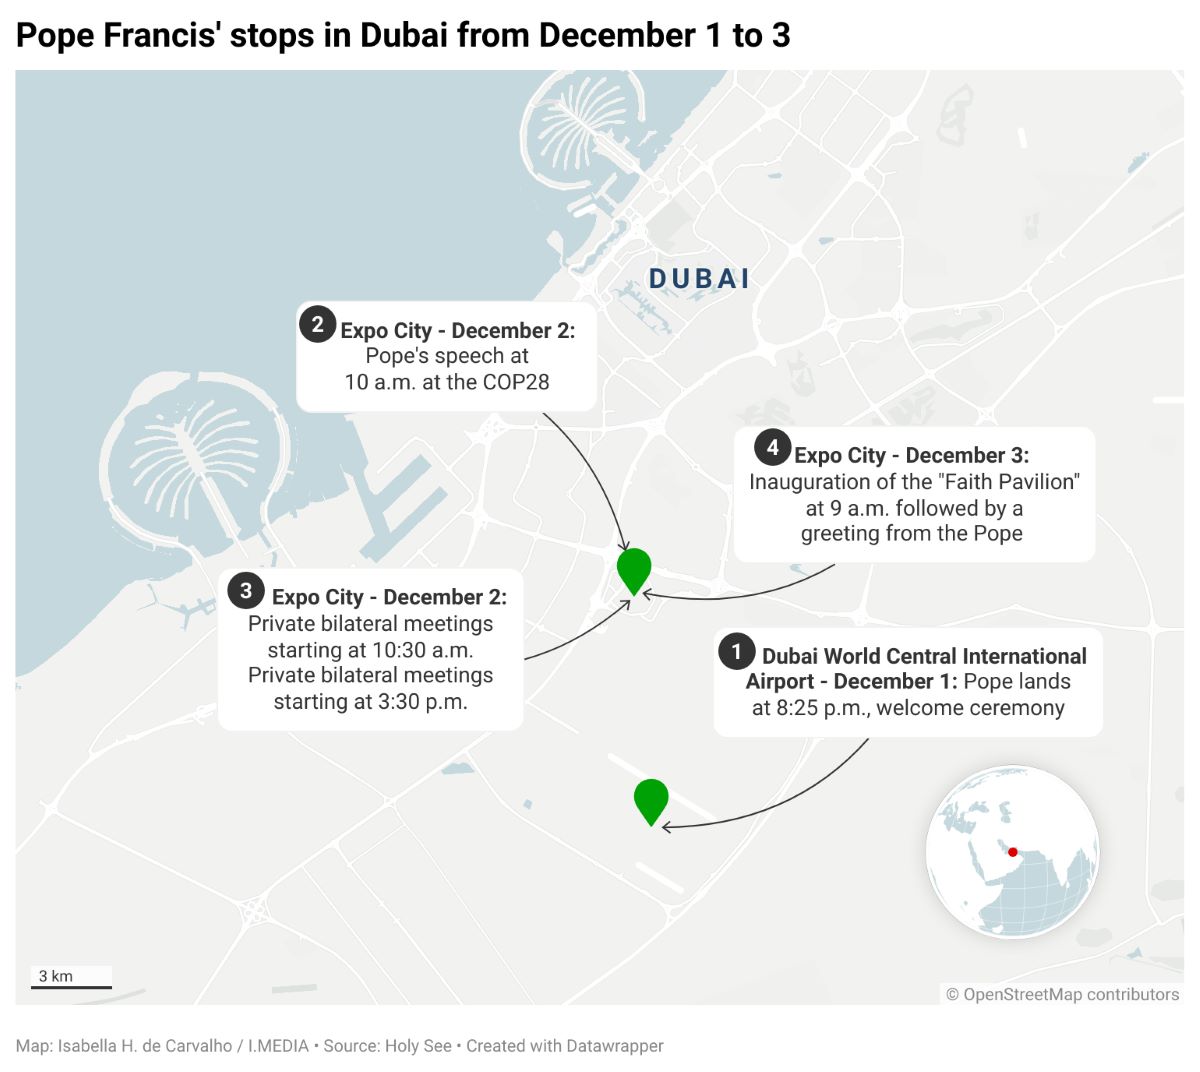 A map showing Pope Francis' stops during his trip to Dubai for the COP28 in December 2023